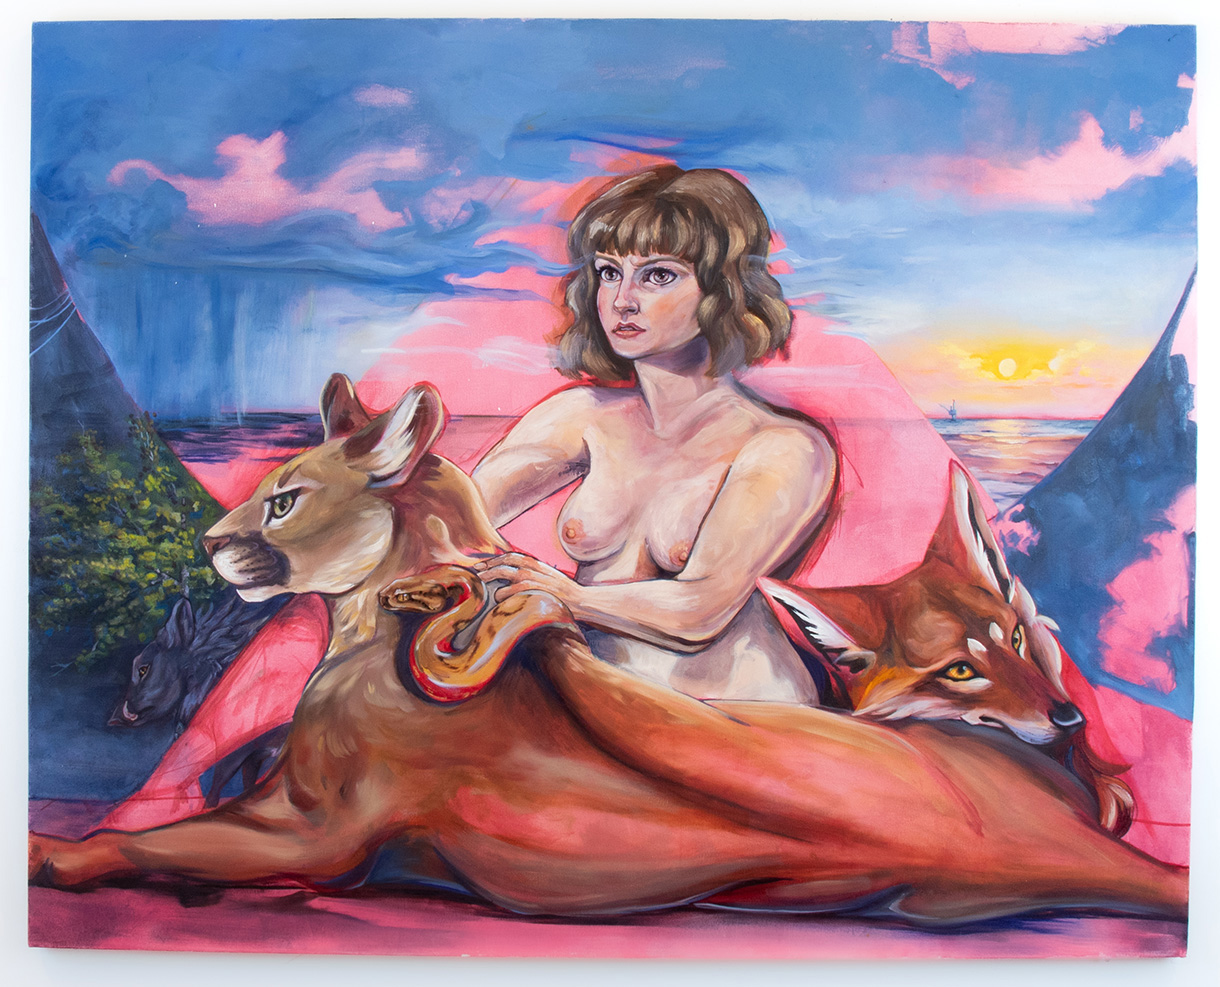 Colorful painting of a nude woman petting wild animals that look like a lioness and a fox in a landscape.